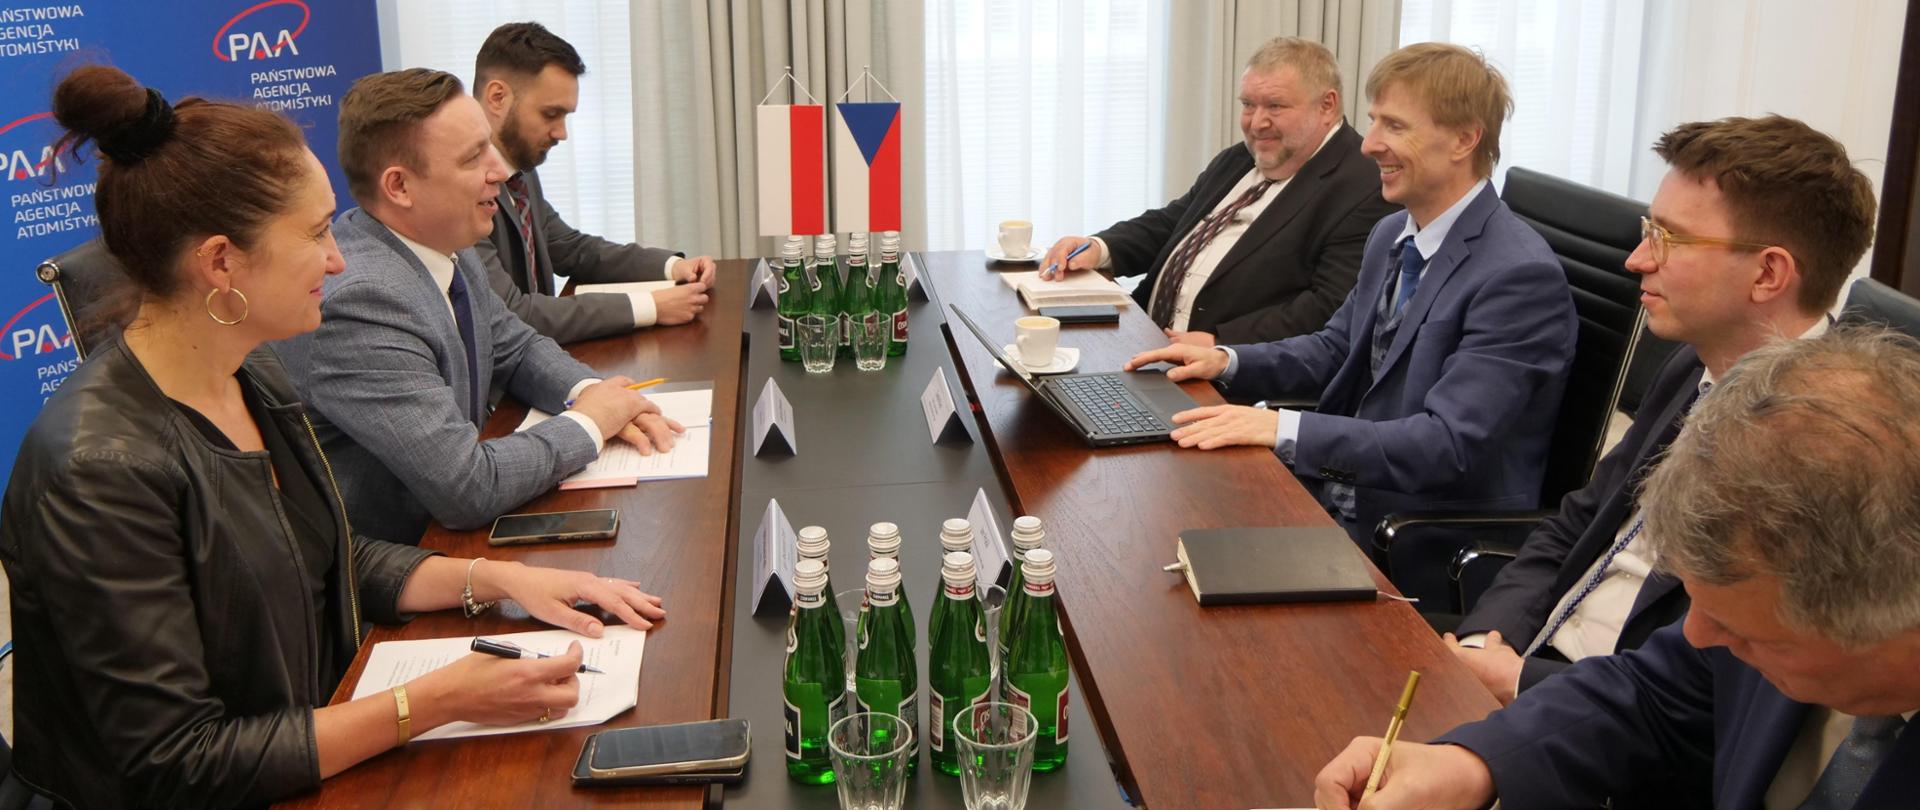 Meeting with representatives of the Czech Ministry of Industry and Trade. Meeting participants are sitting at a table.